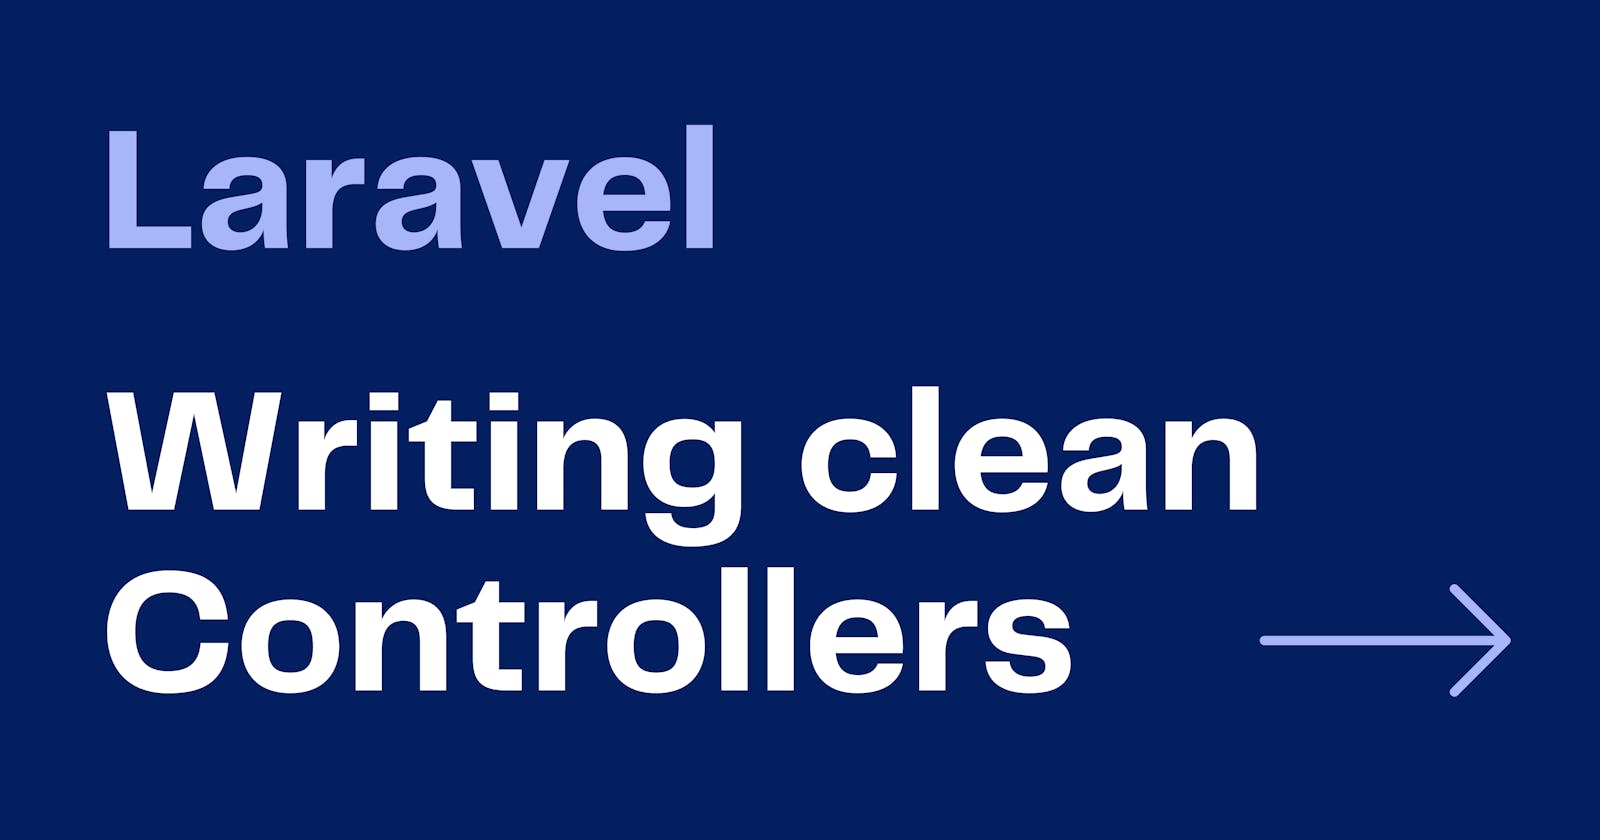 How to write clean Controllers in Laravel